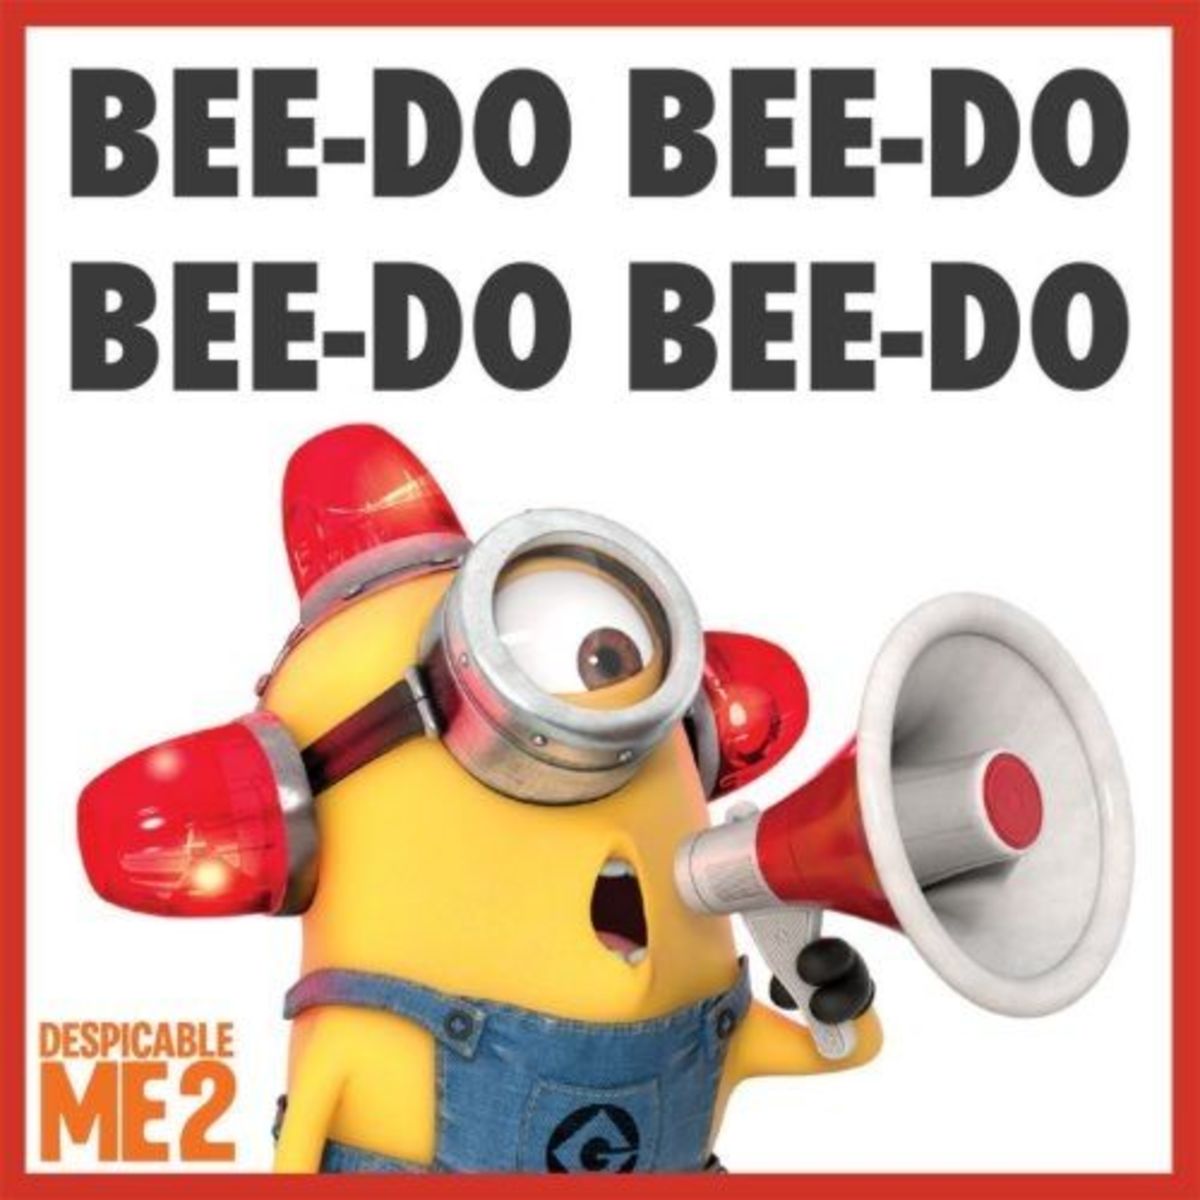 Image from Despicable Me